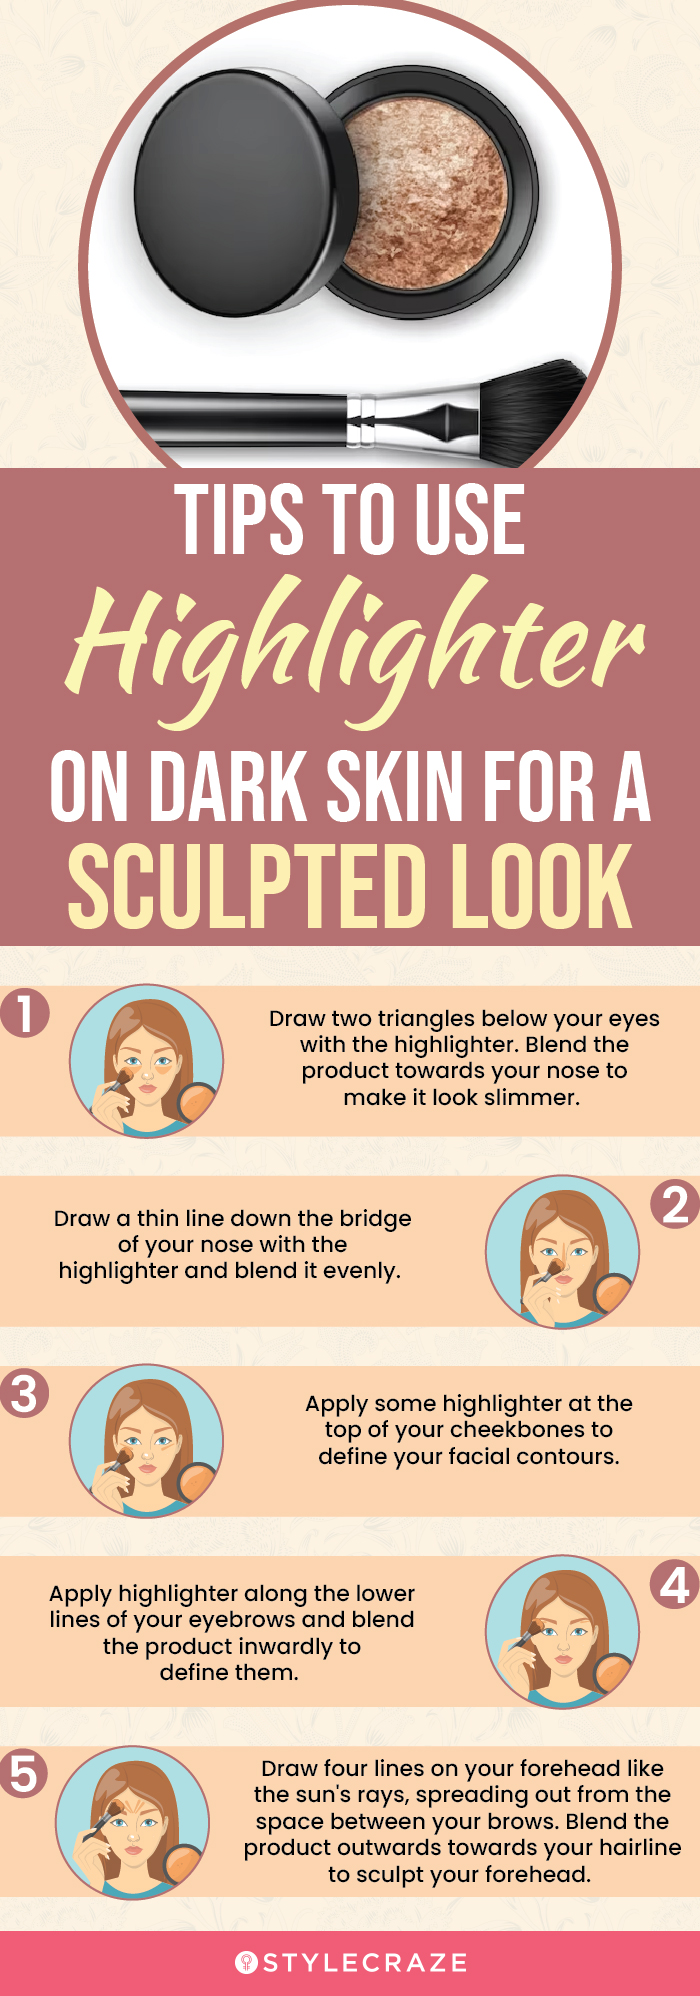 Tips To Apply A Highlighter On Dark Skin(infographic)